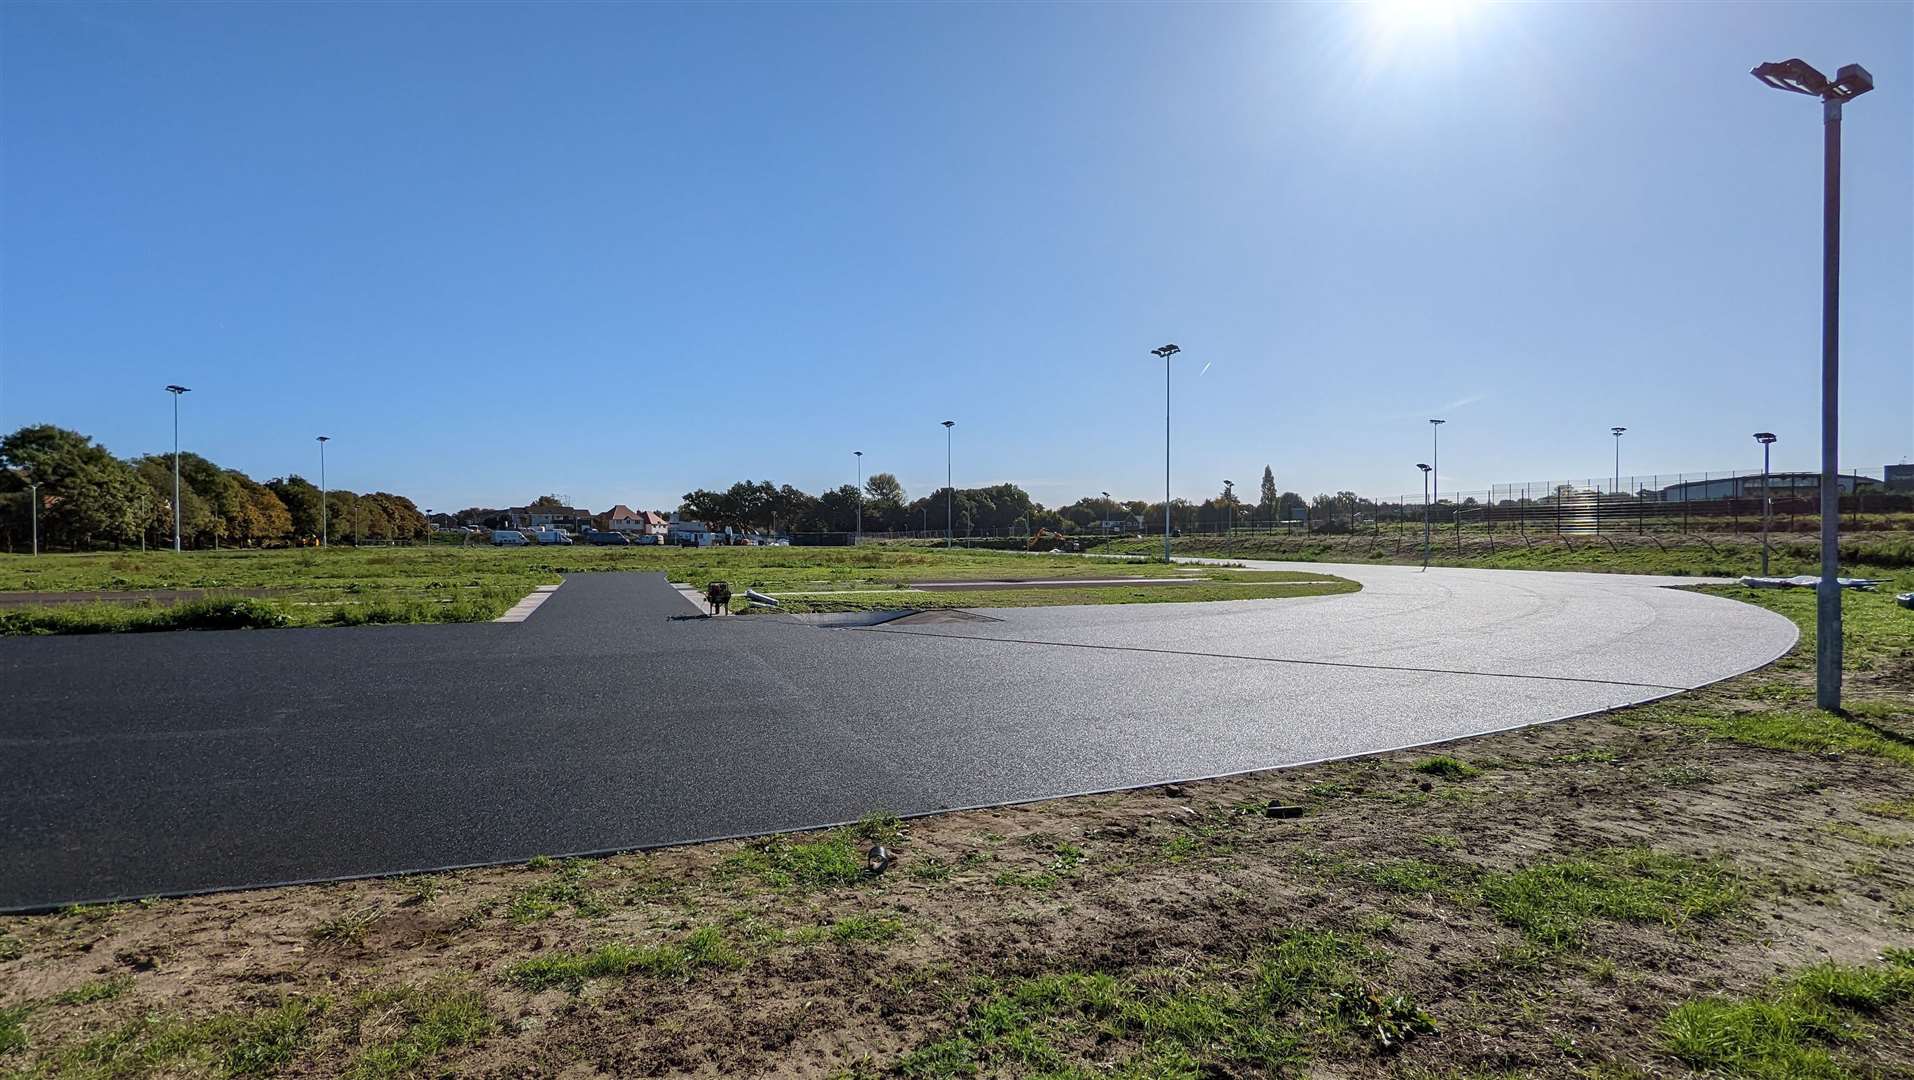 Latest views of the ongoing work on the new athletics track at the Three Hills Sports Park in Folkestone